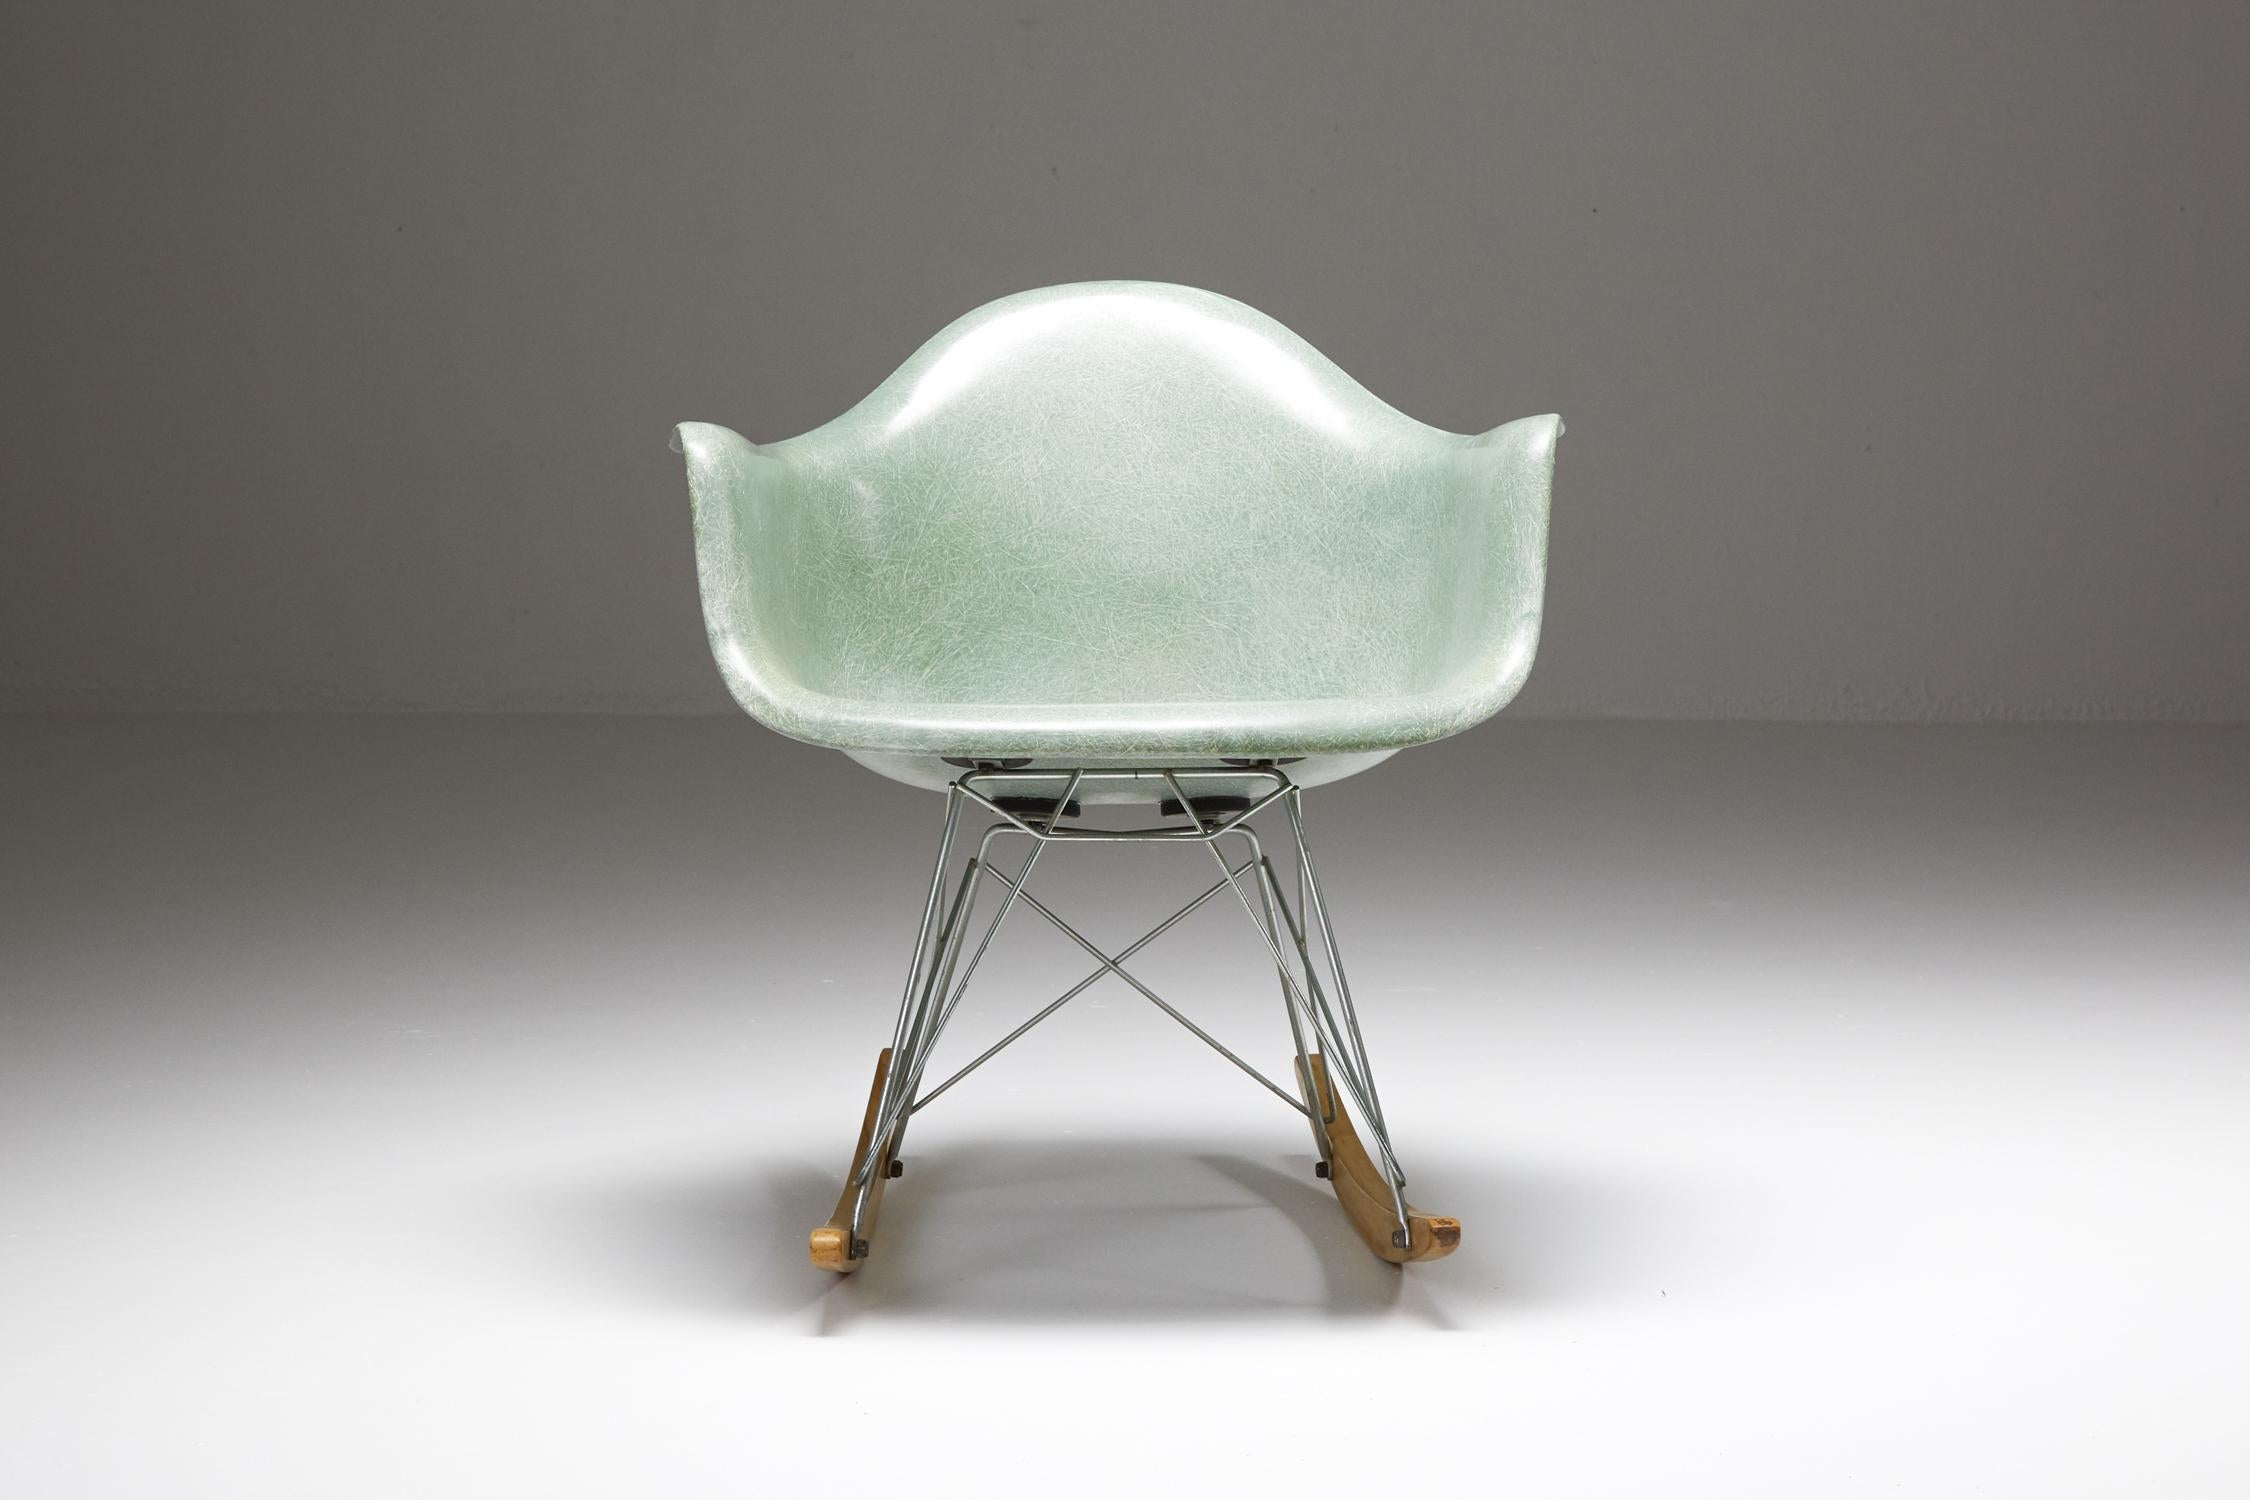 Charles and Ray Eames, Herman Miller, seafoam rocker, RAR, 1954-1955

Fully original RAR rocker from the very first production

The Eameses are best known for their groundbreaking contributions to architecture, furniture design, industrial